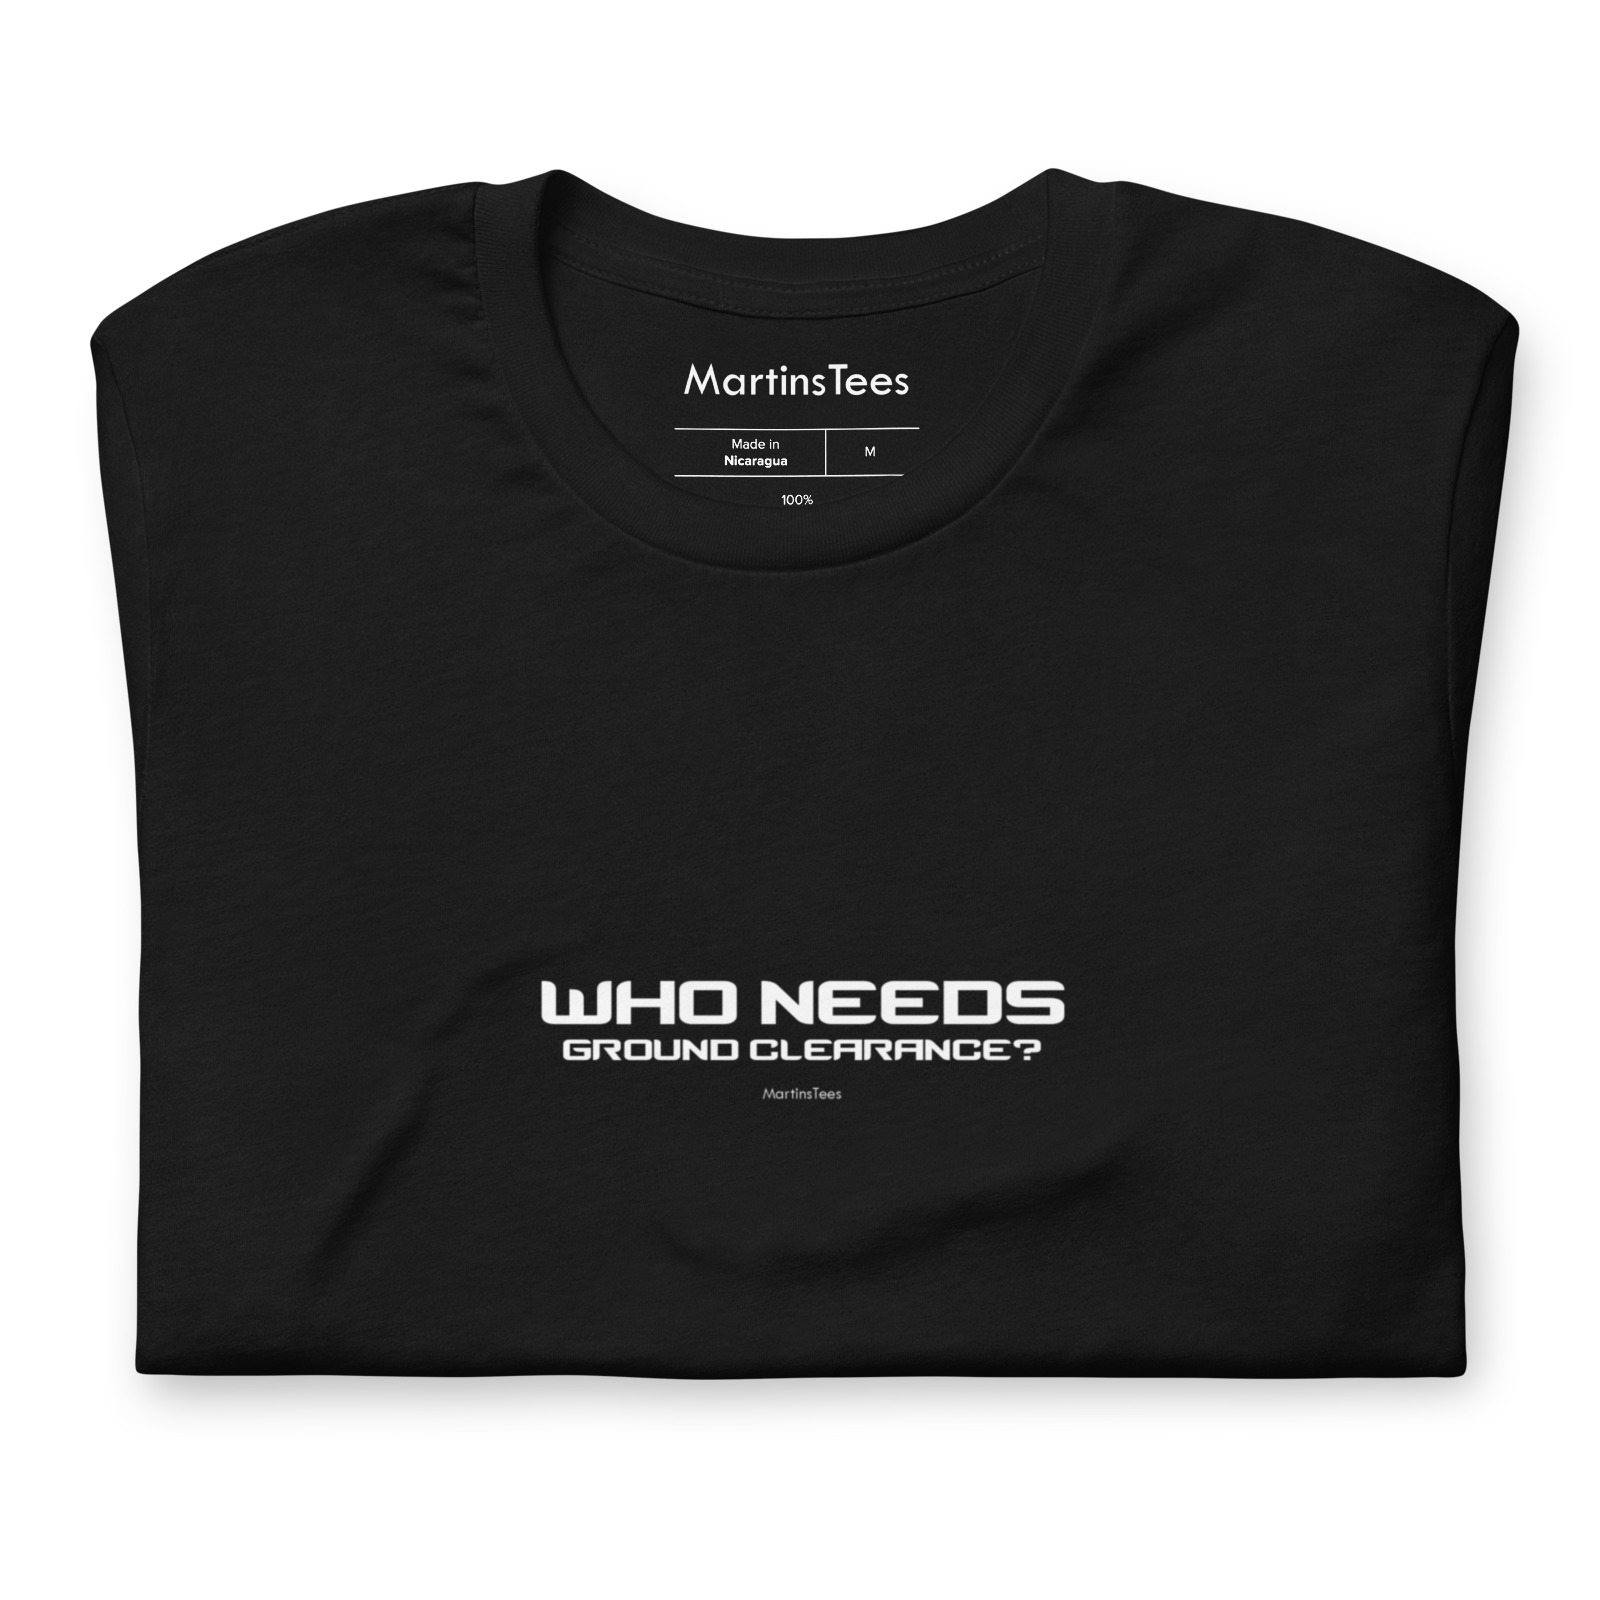 T-shirt: WHO NEEDS - GROUND CLEARANCE?